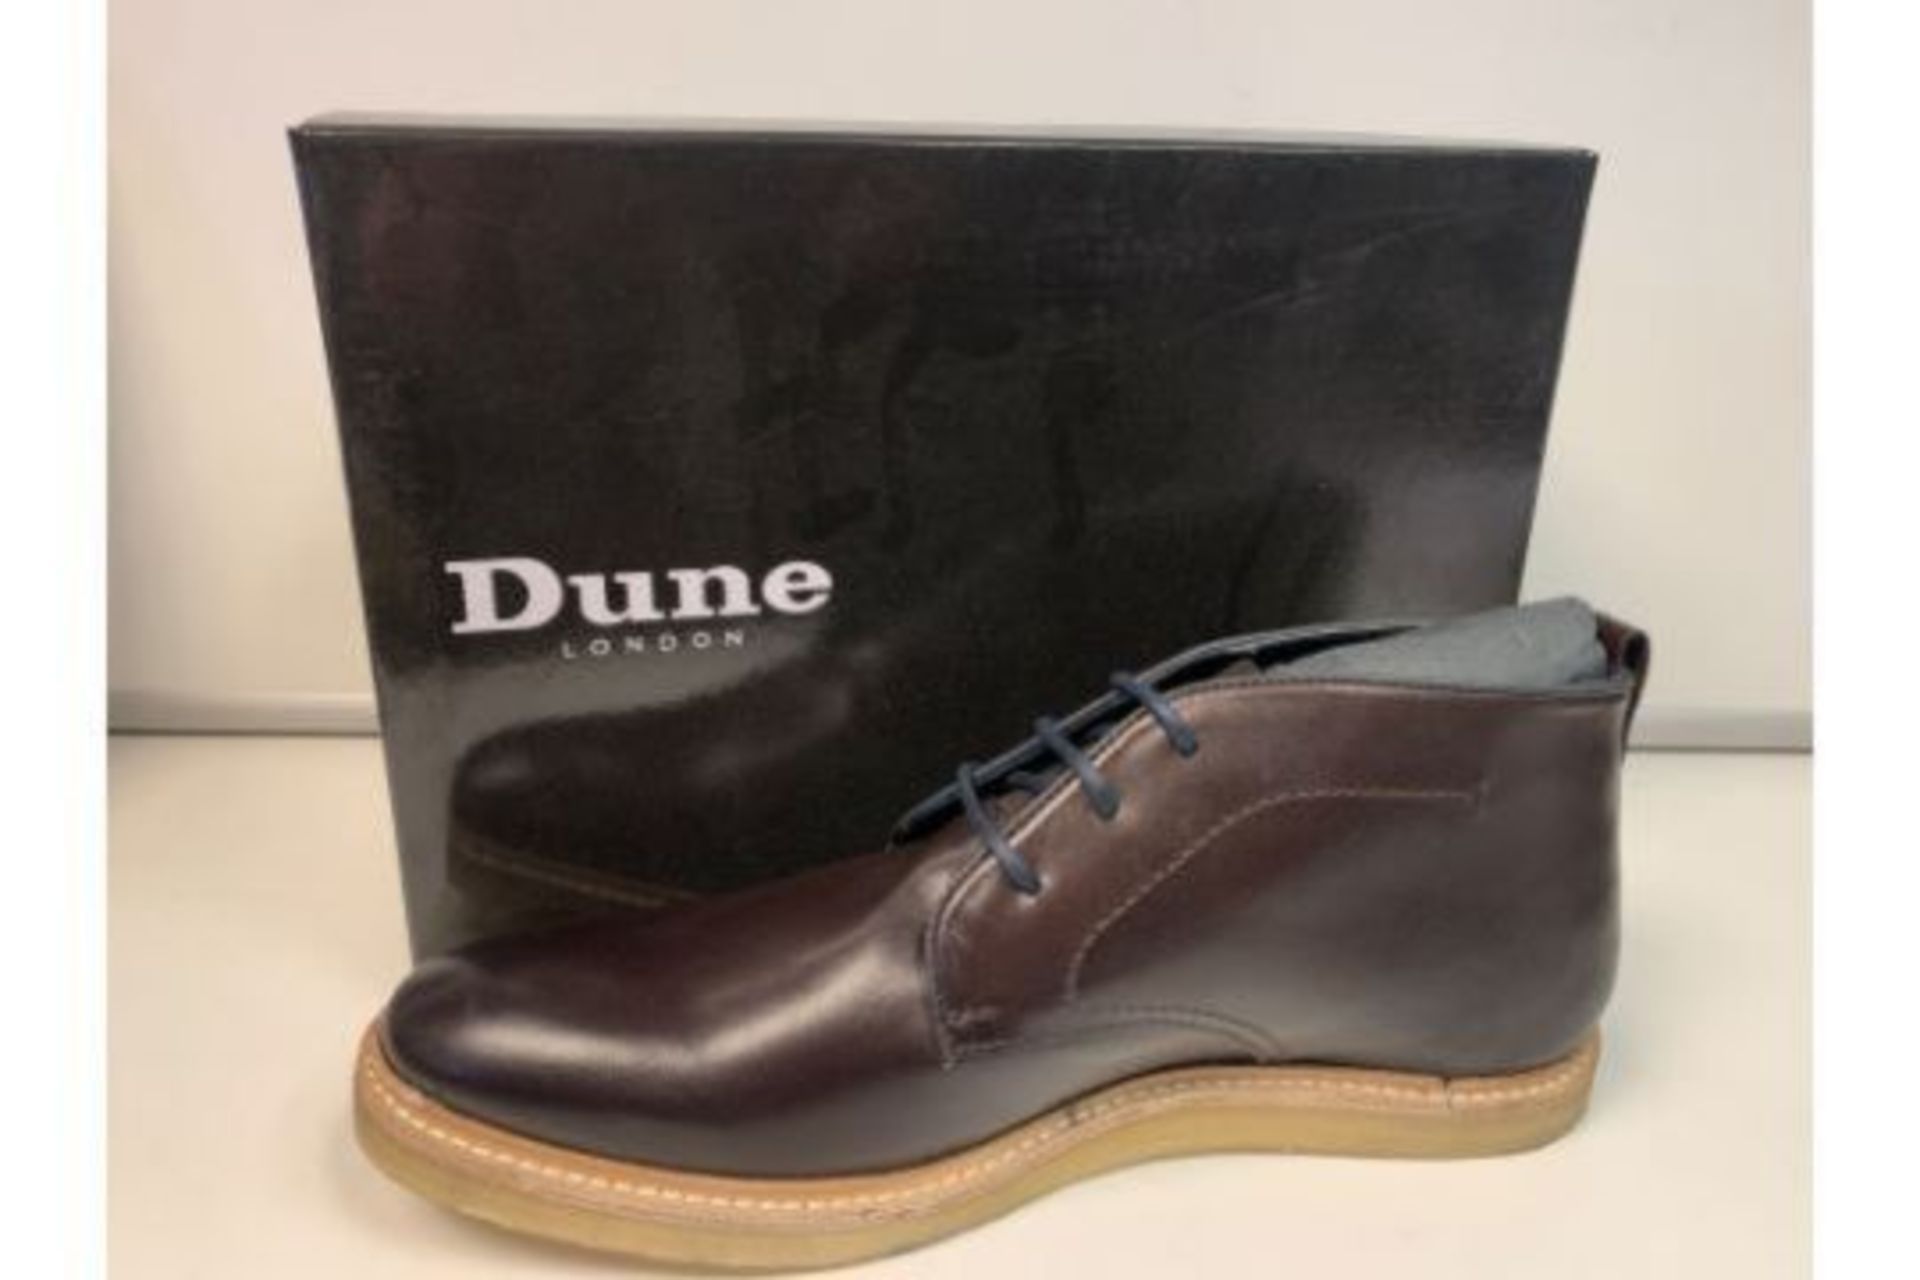 BRAND NEW DUNE LONDON DARK BROWN LEATHER CHUKKA BOOTS SIZE 6 RRP £129 - PCK